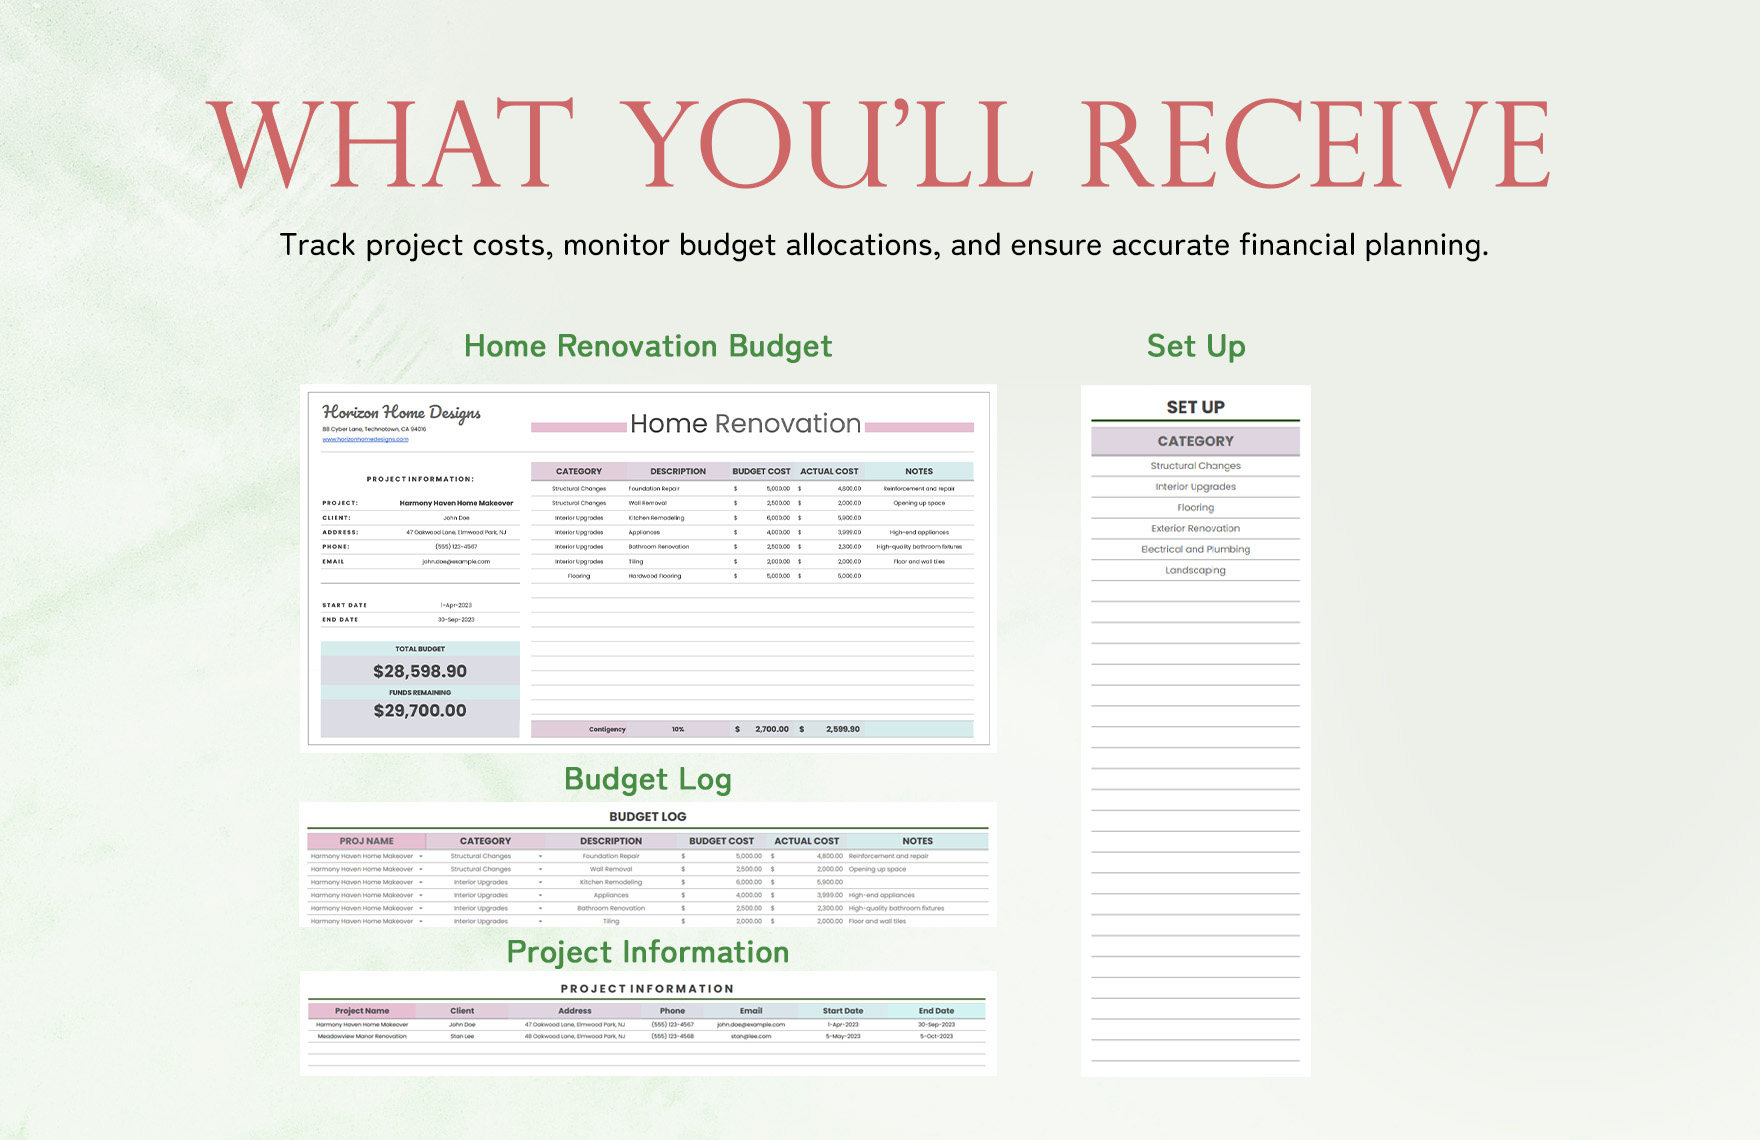 Home Renovation Budget Planner Template